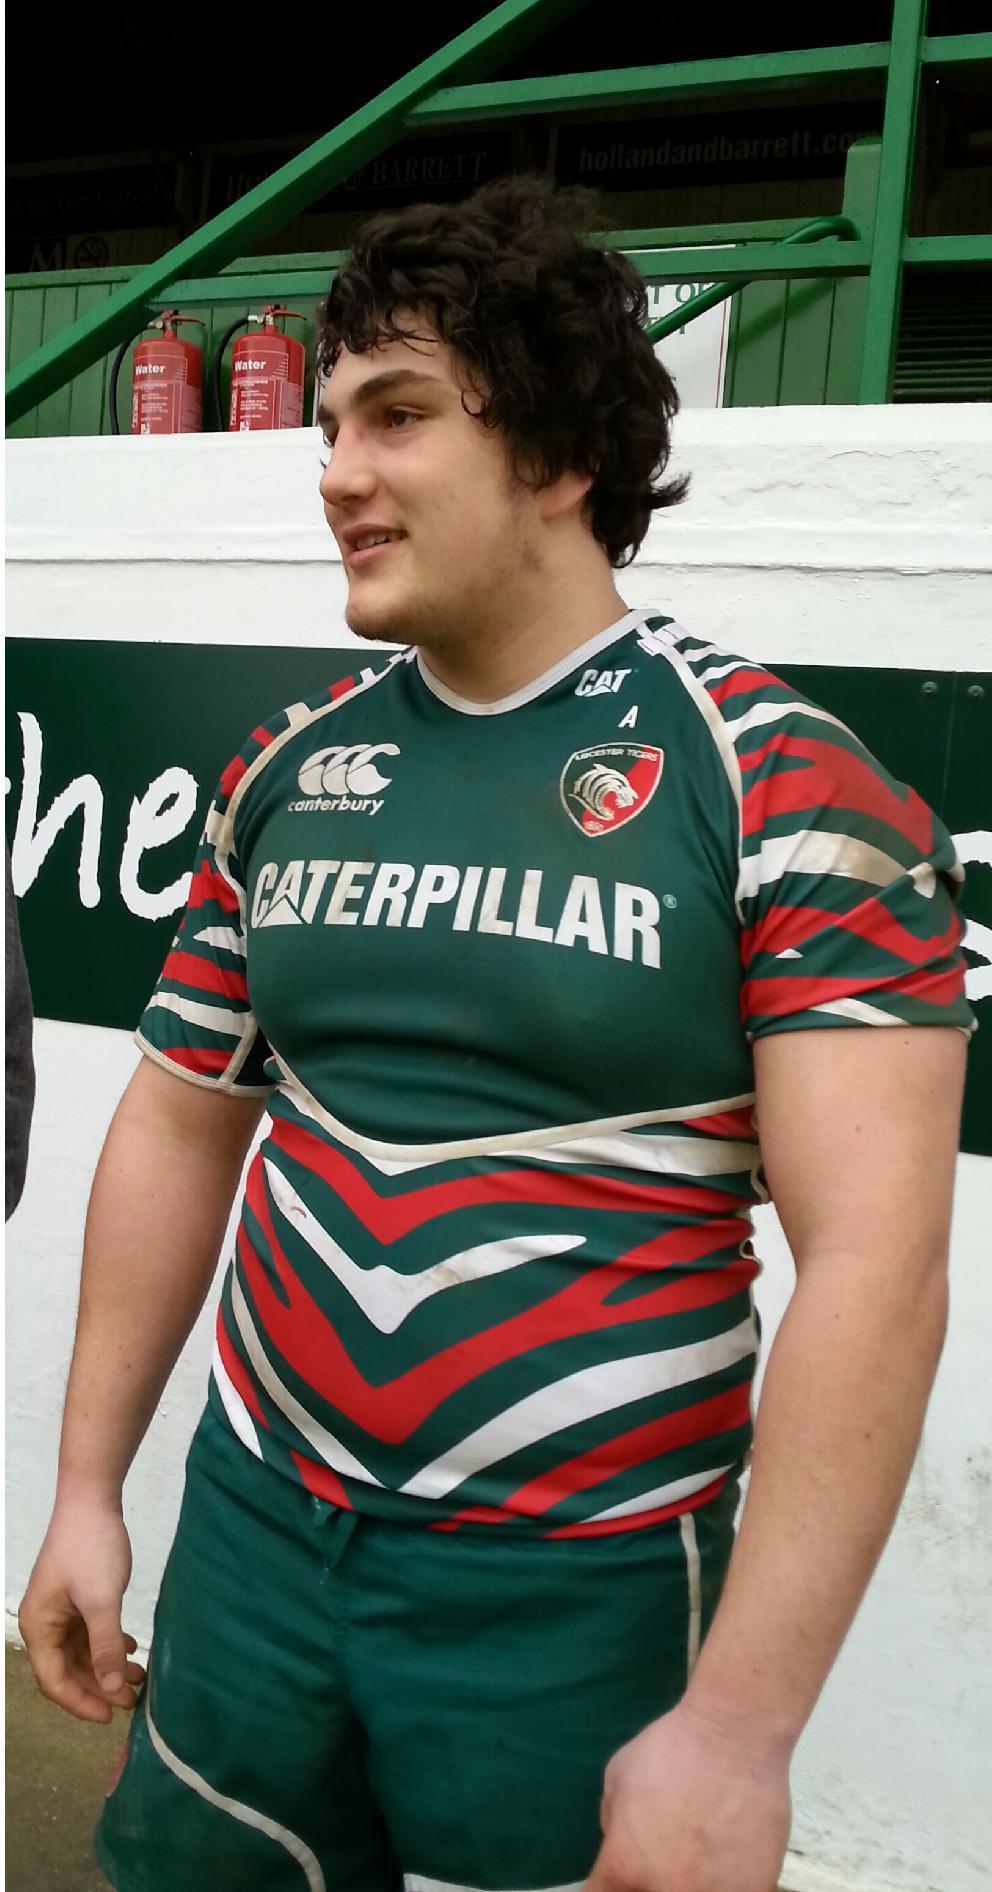 Owen Hills selected for England Under 18's Ex Bosworth prop forward Owen Hills has been named in a squad of 24 to play against Scotland on Sunday 9th March Owen left Bosworth in the summer of 2012,